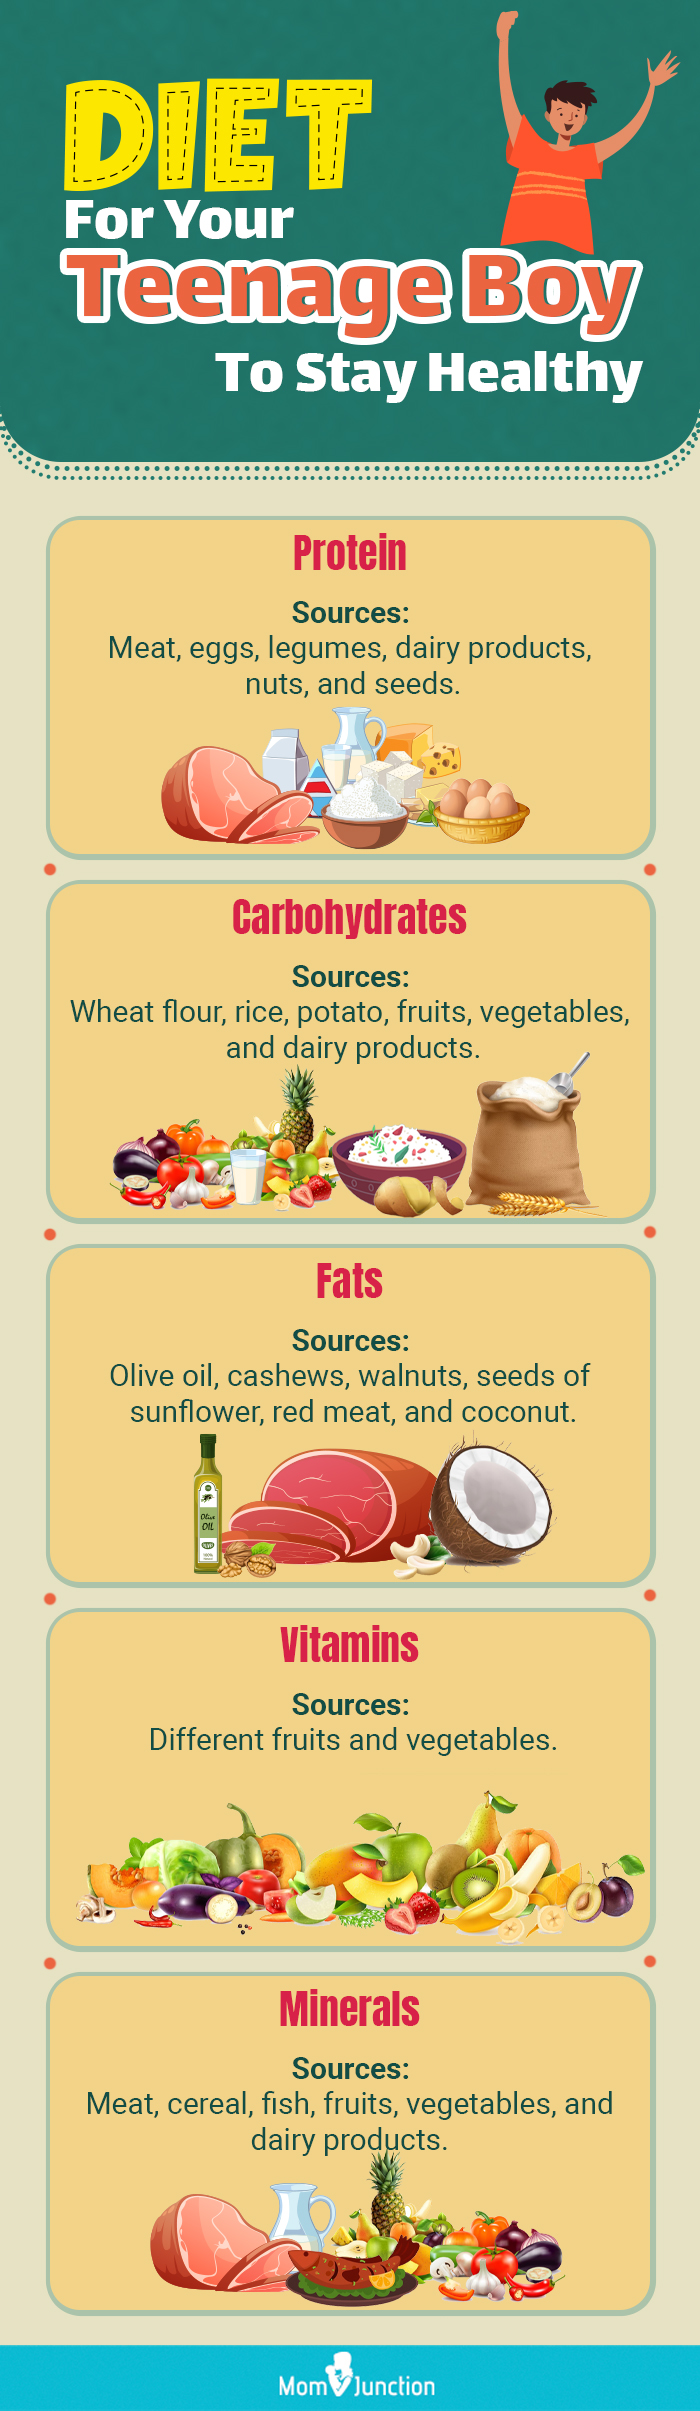 diet for your teenage boy to stay healthy (infographic)